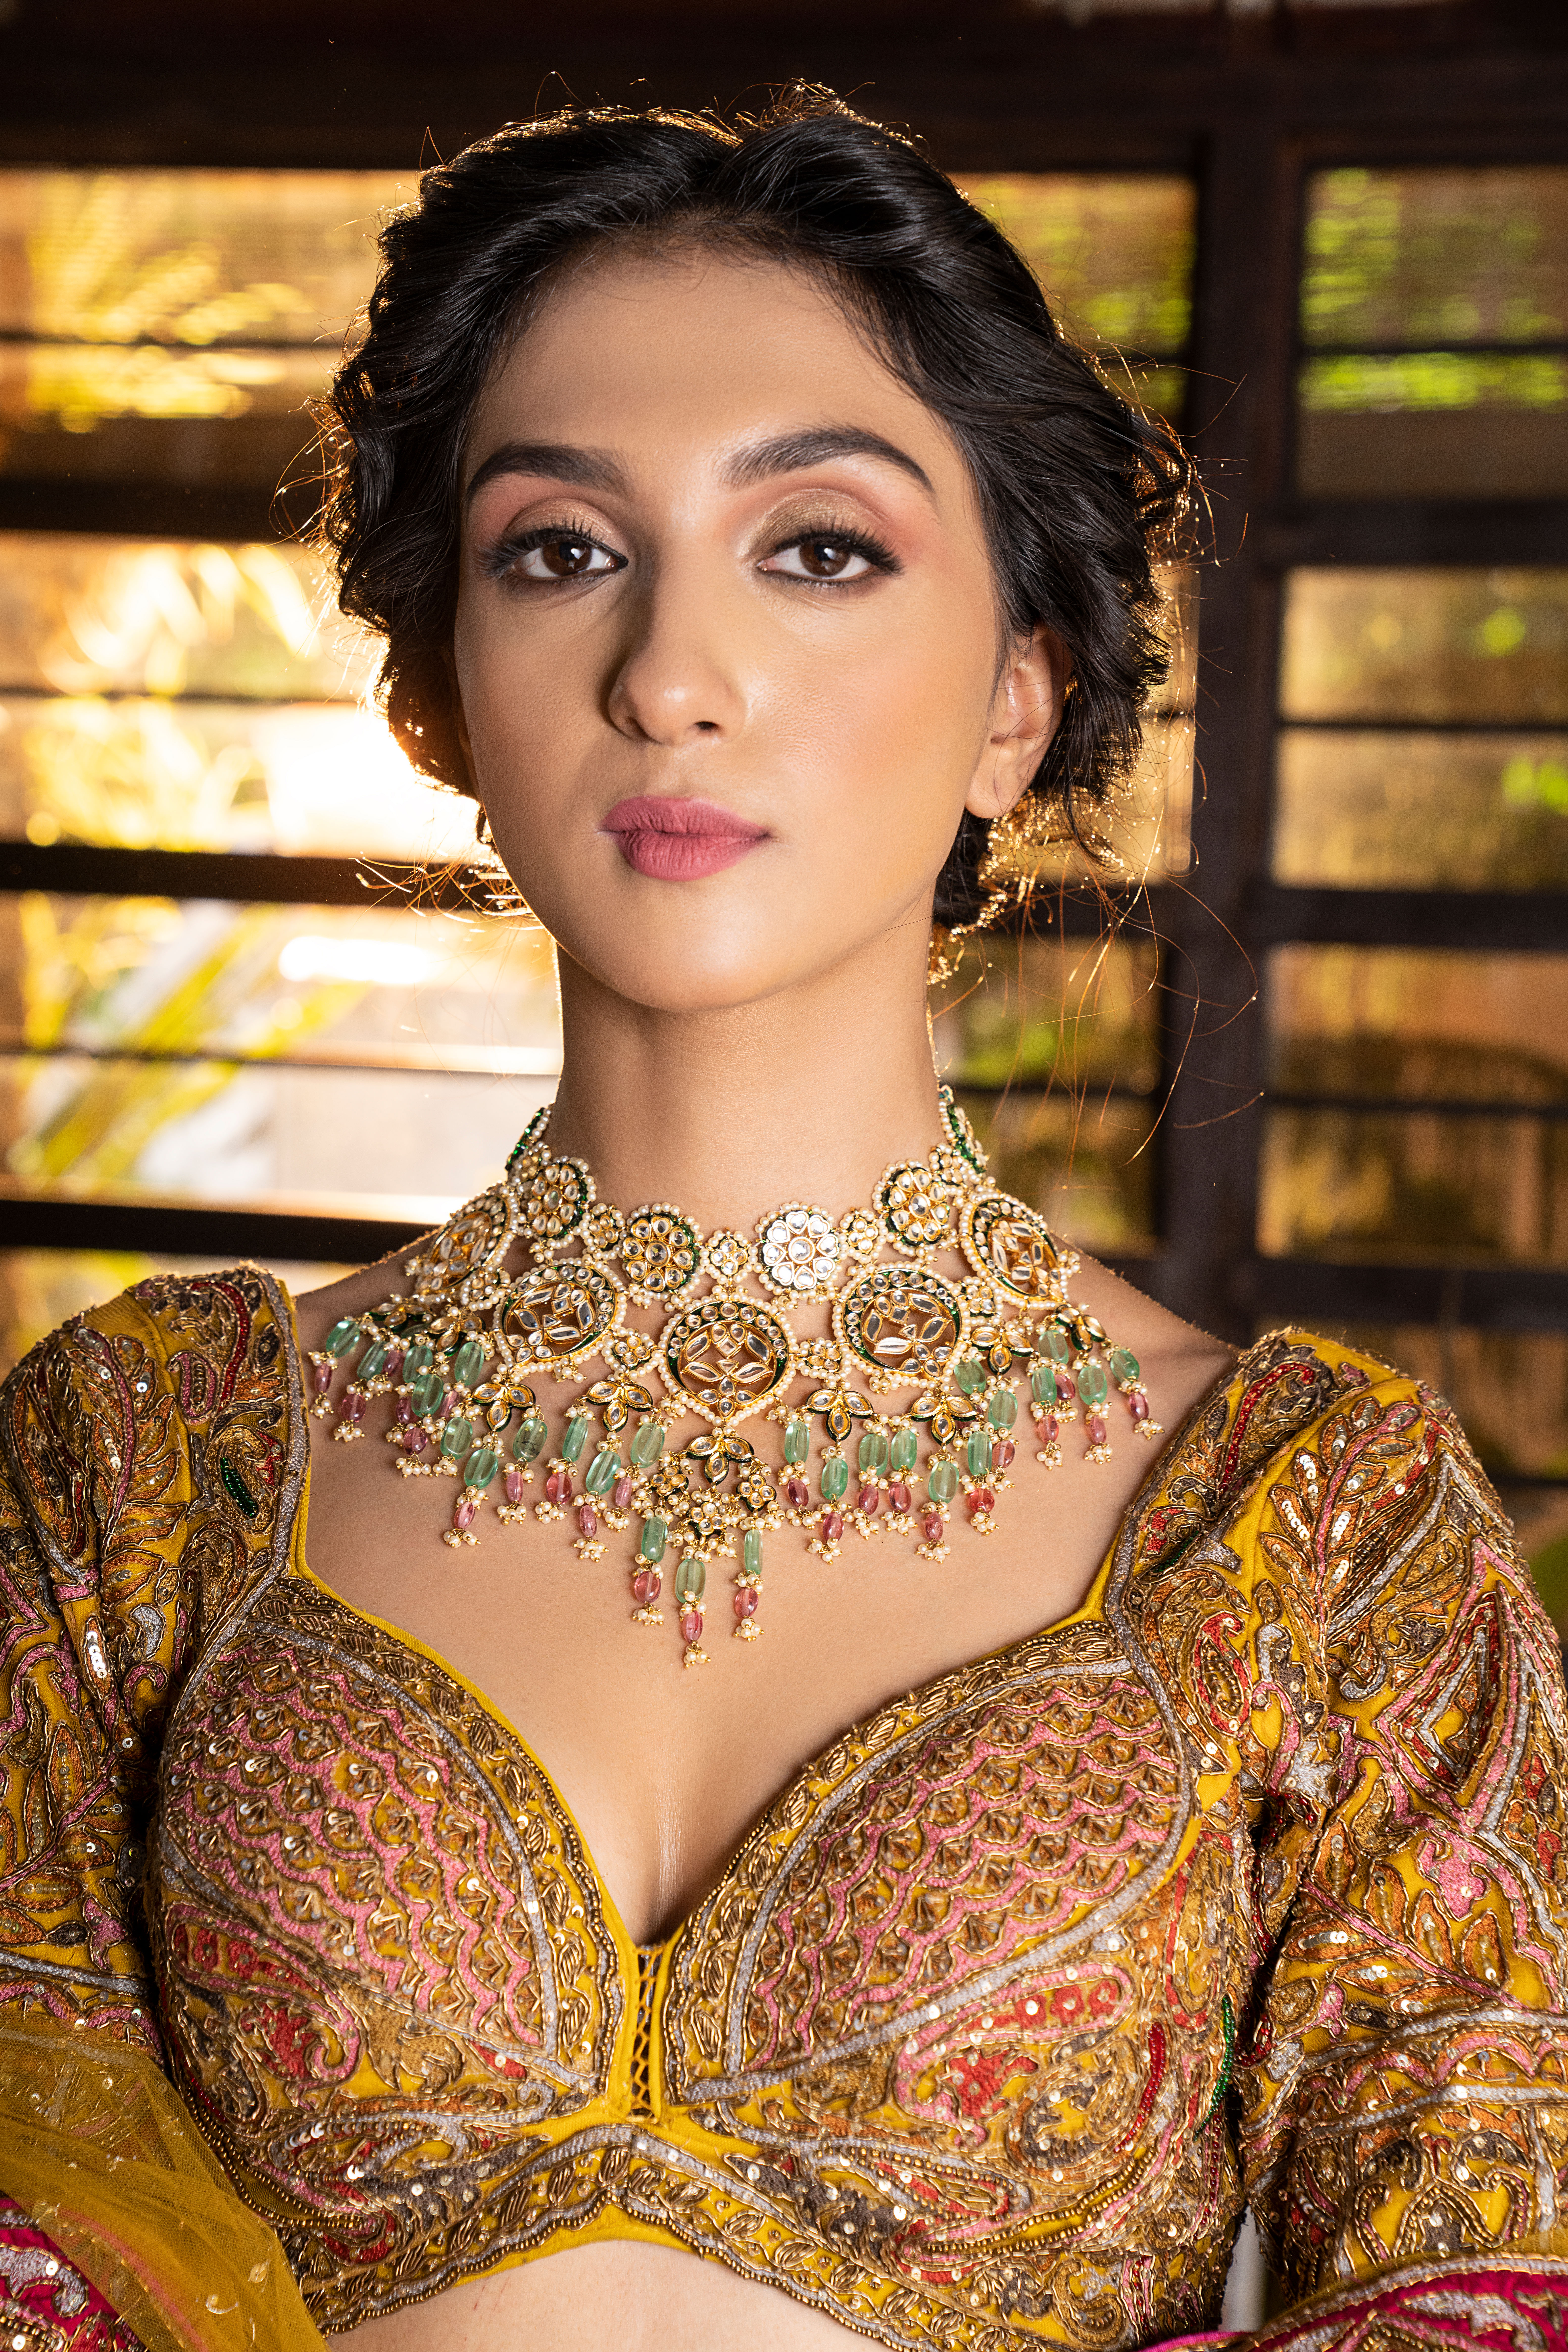 The Best Choker Necklace Designs for a Lehenga Look